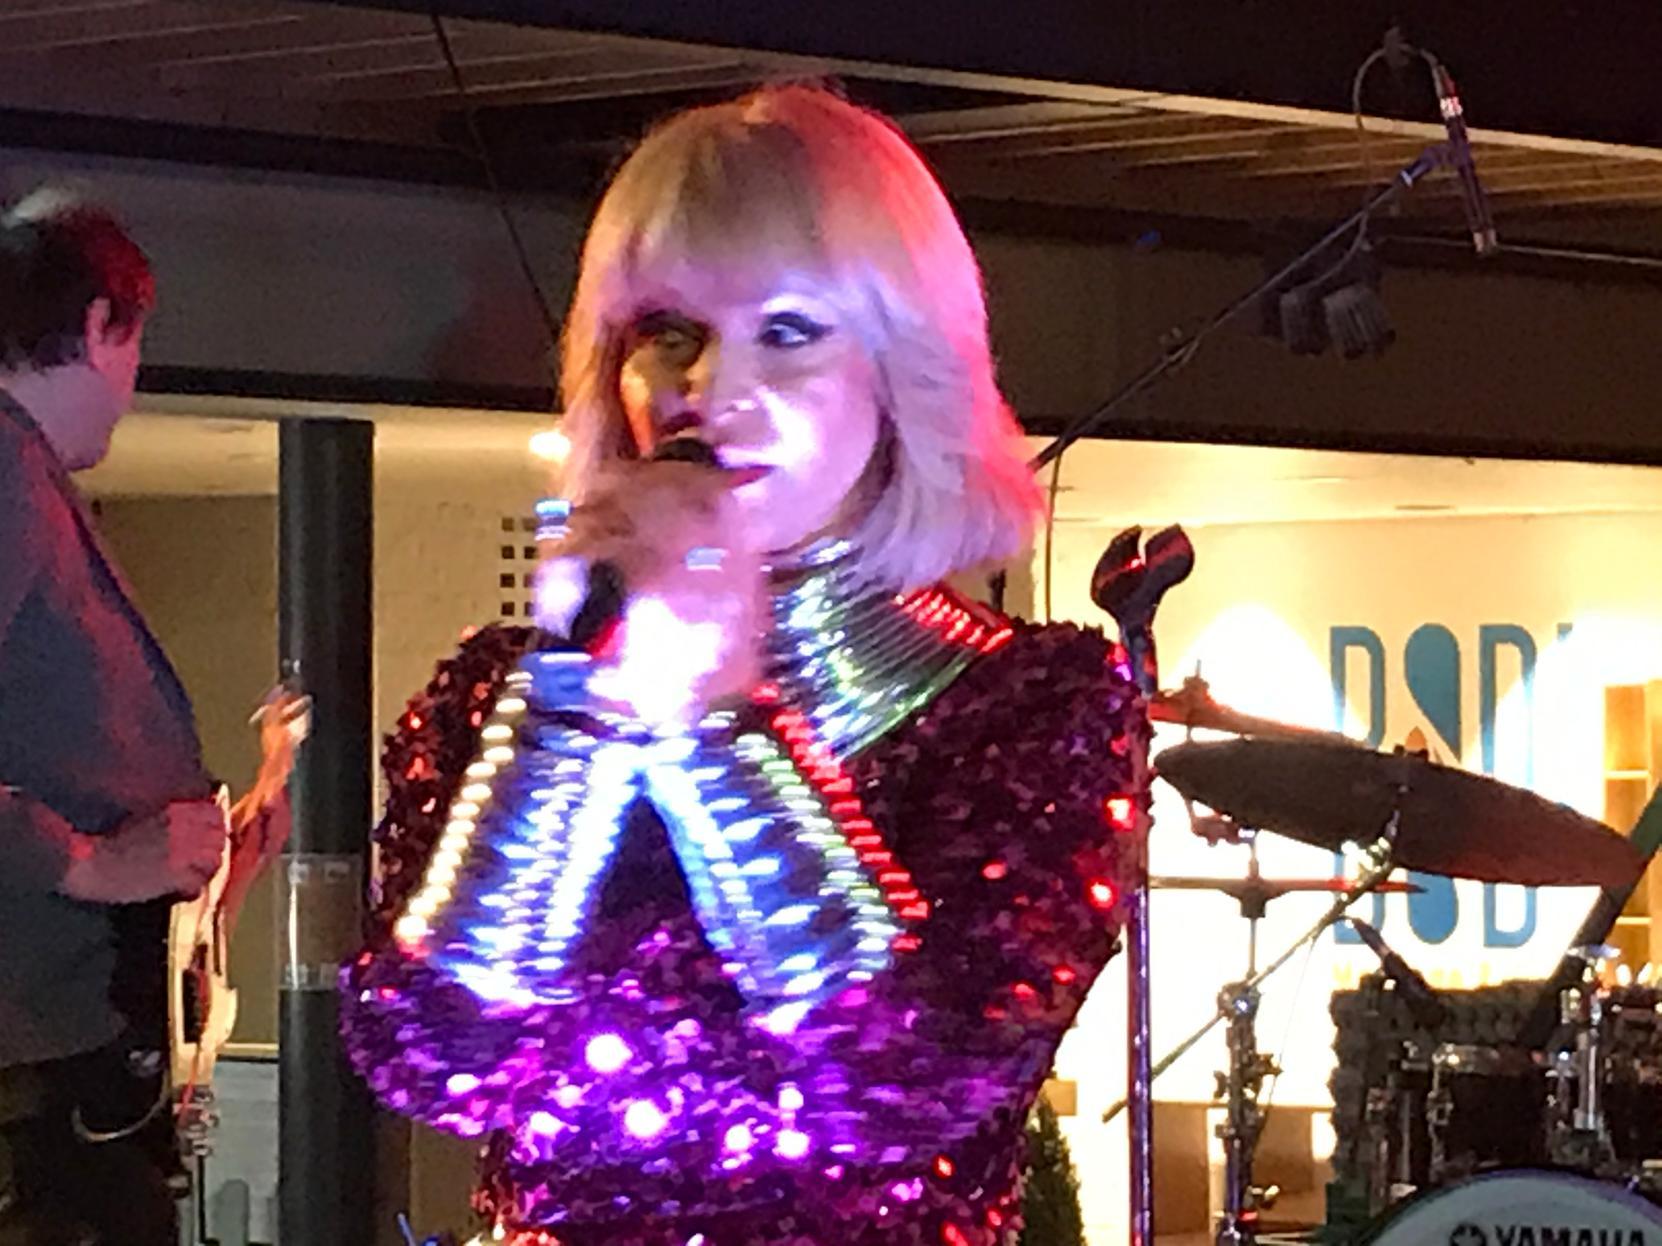 Toyah's impressive voice has stood the test of time